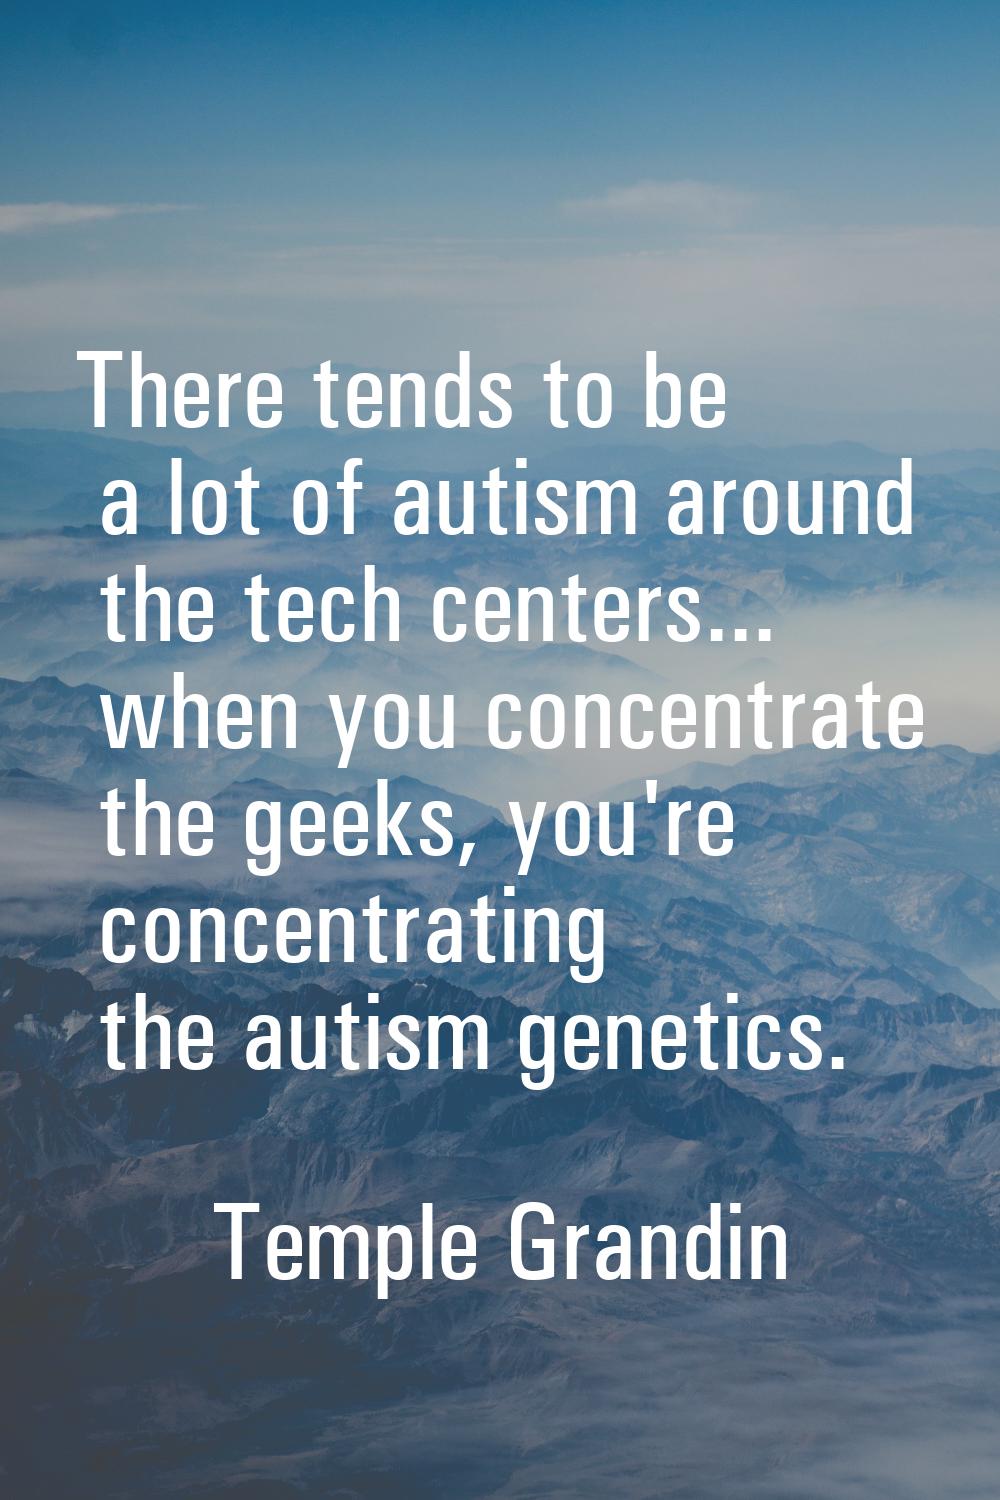 There tends to be a lot of autism around the tech centers... when you concentrate the geeks, you're